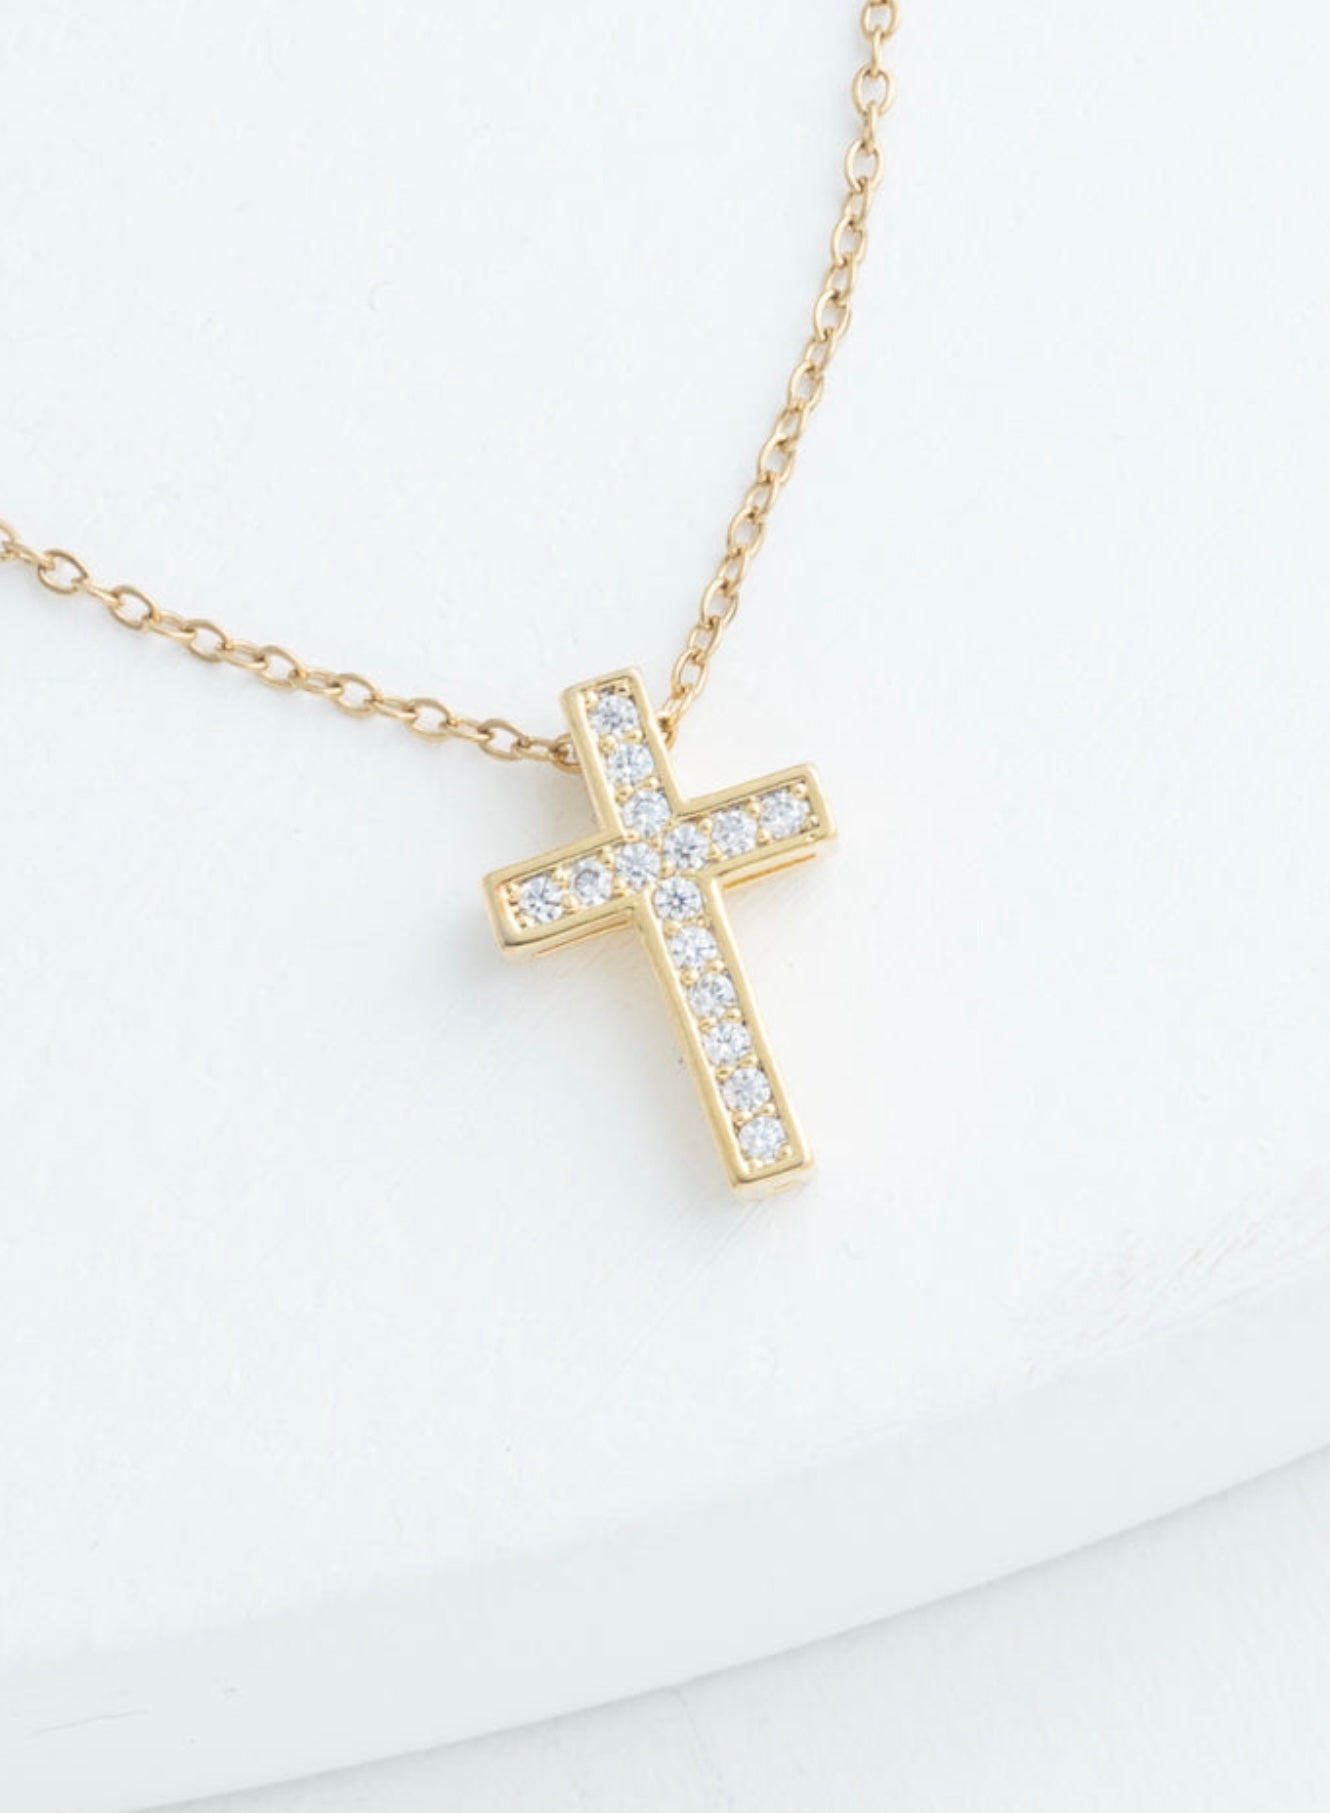 Shine Your Light Cross Necklace in Gold